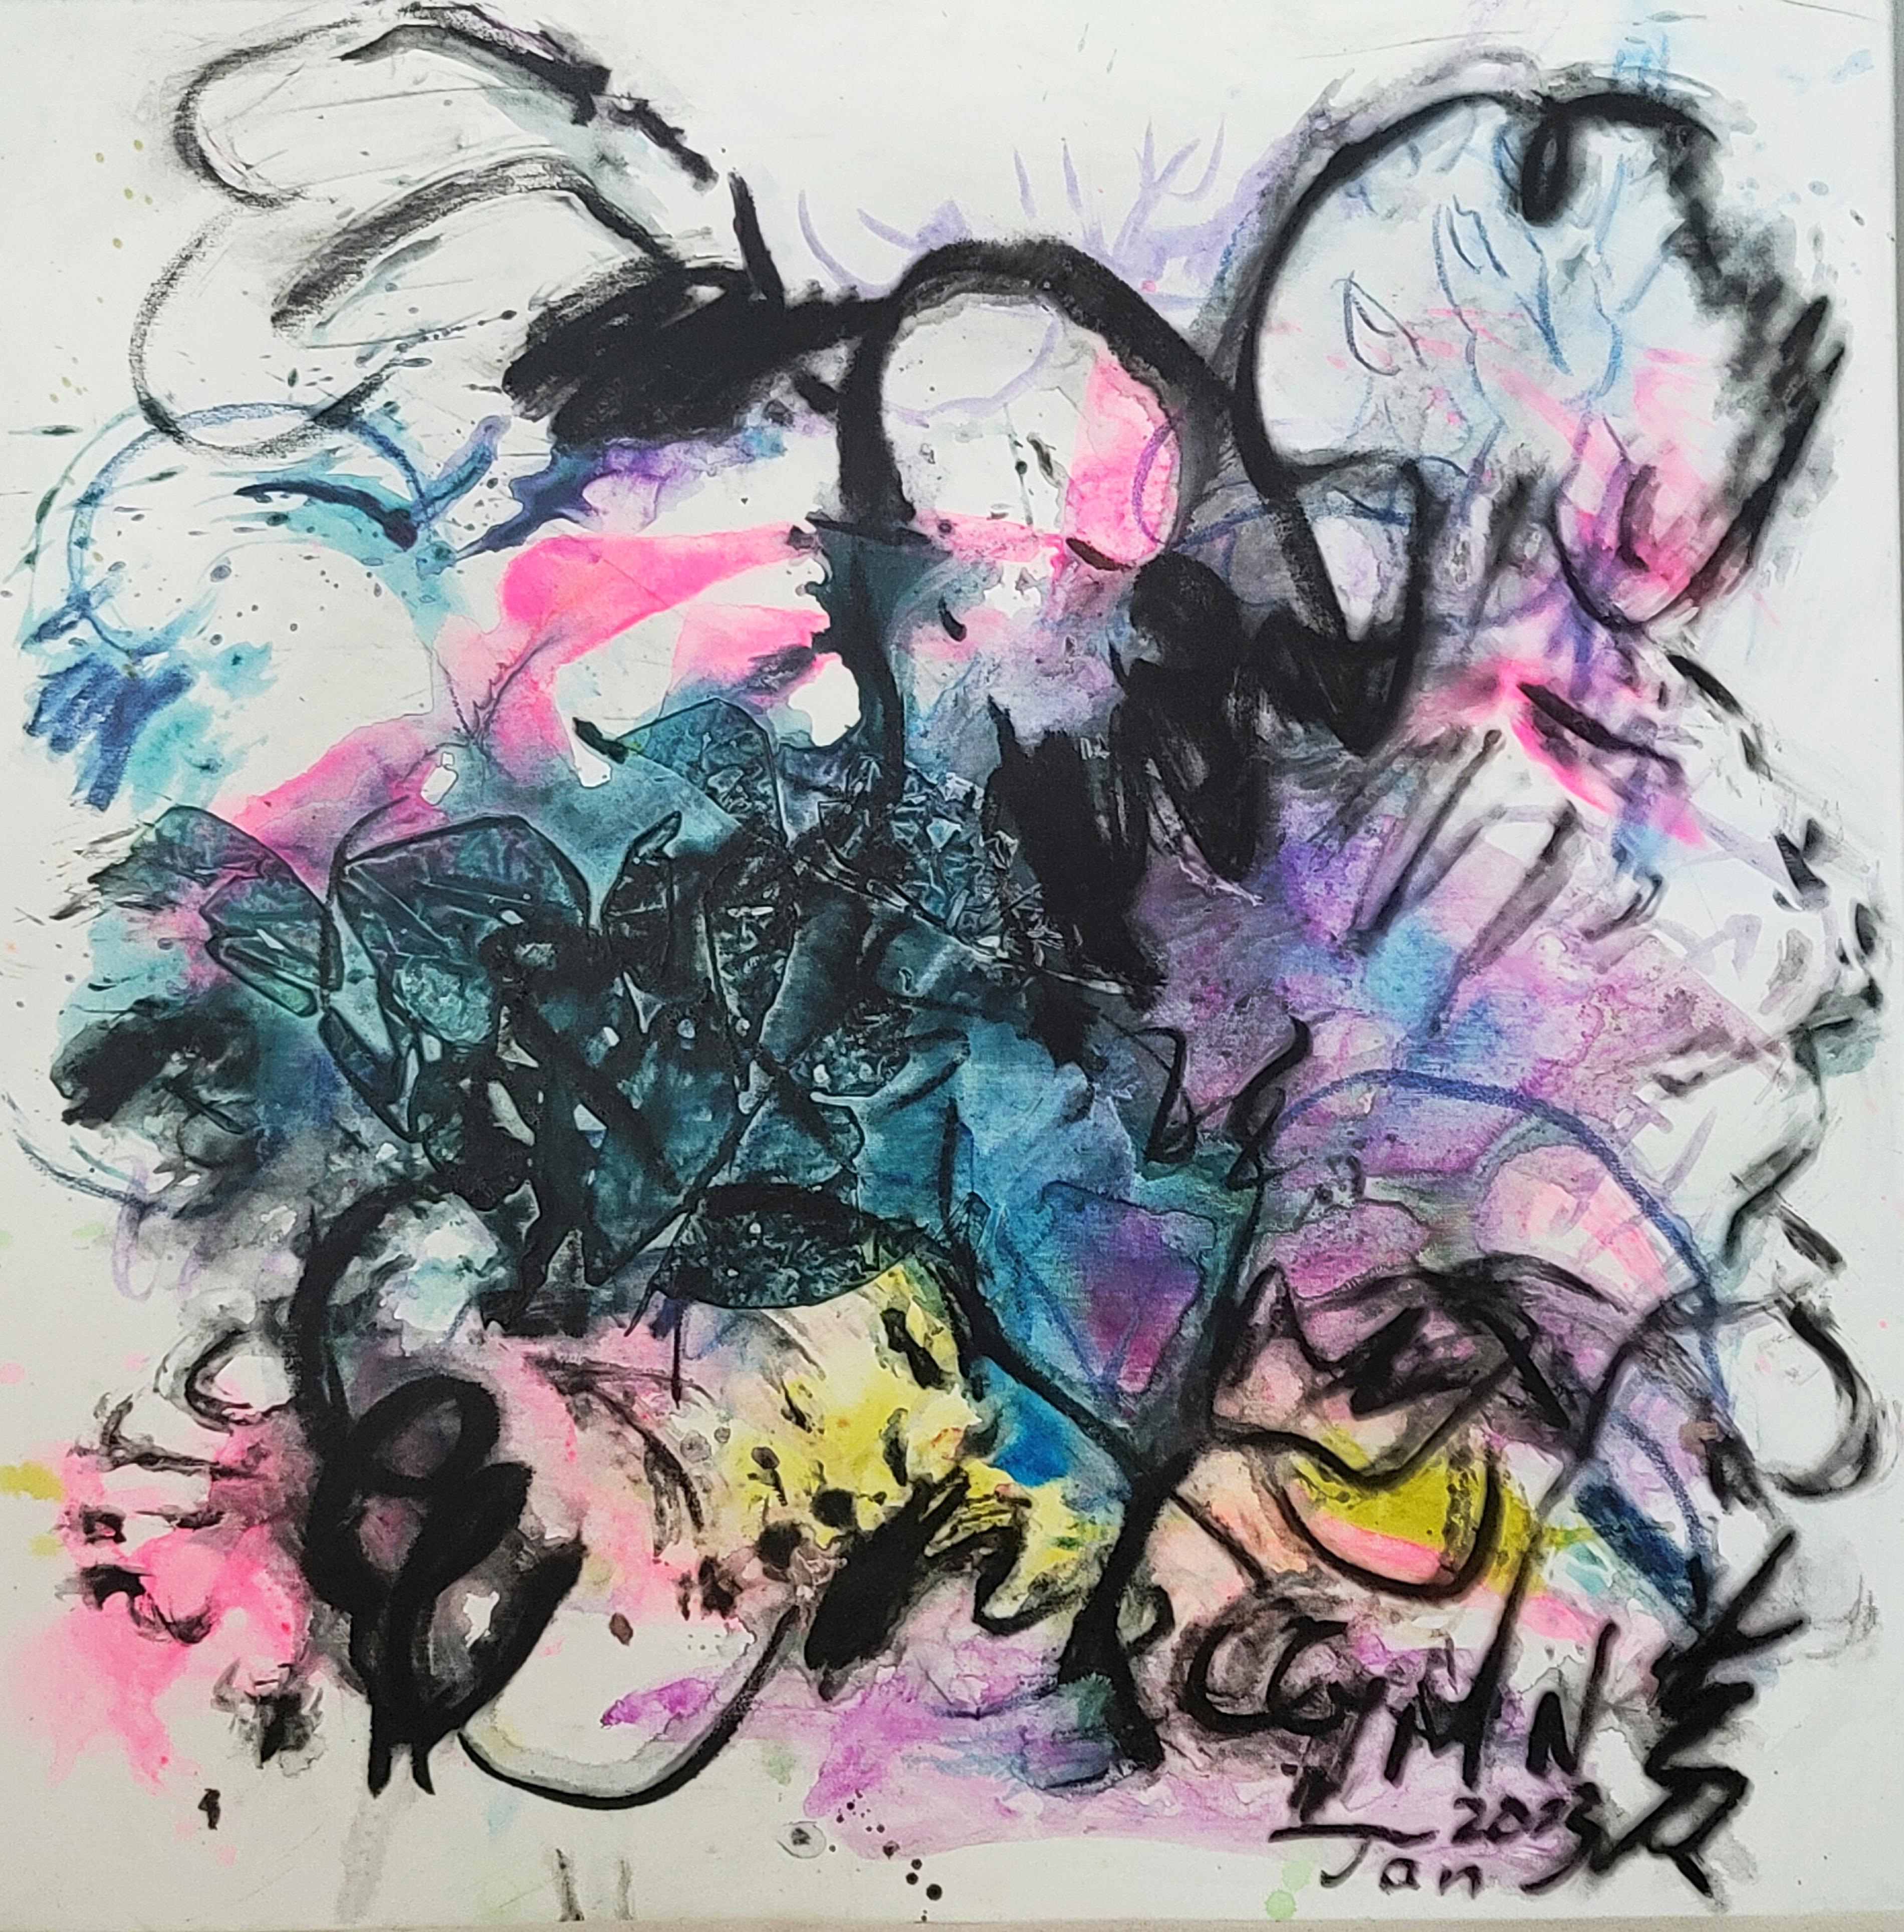 A Singular Transformation II - Energetic, Expressive Abstract, Zen Calligraphy - Painting by Cymn Wong 